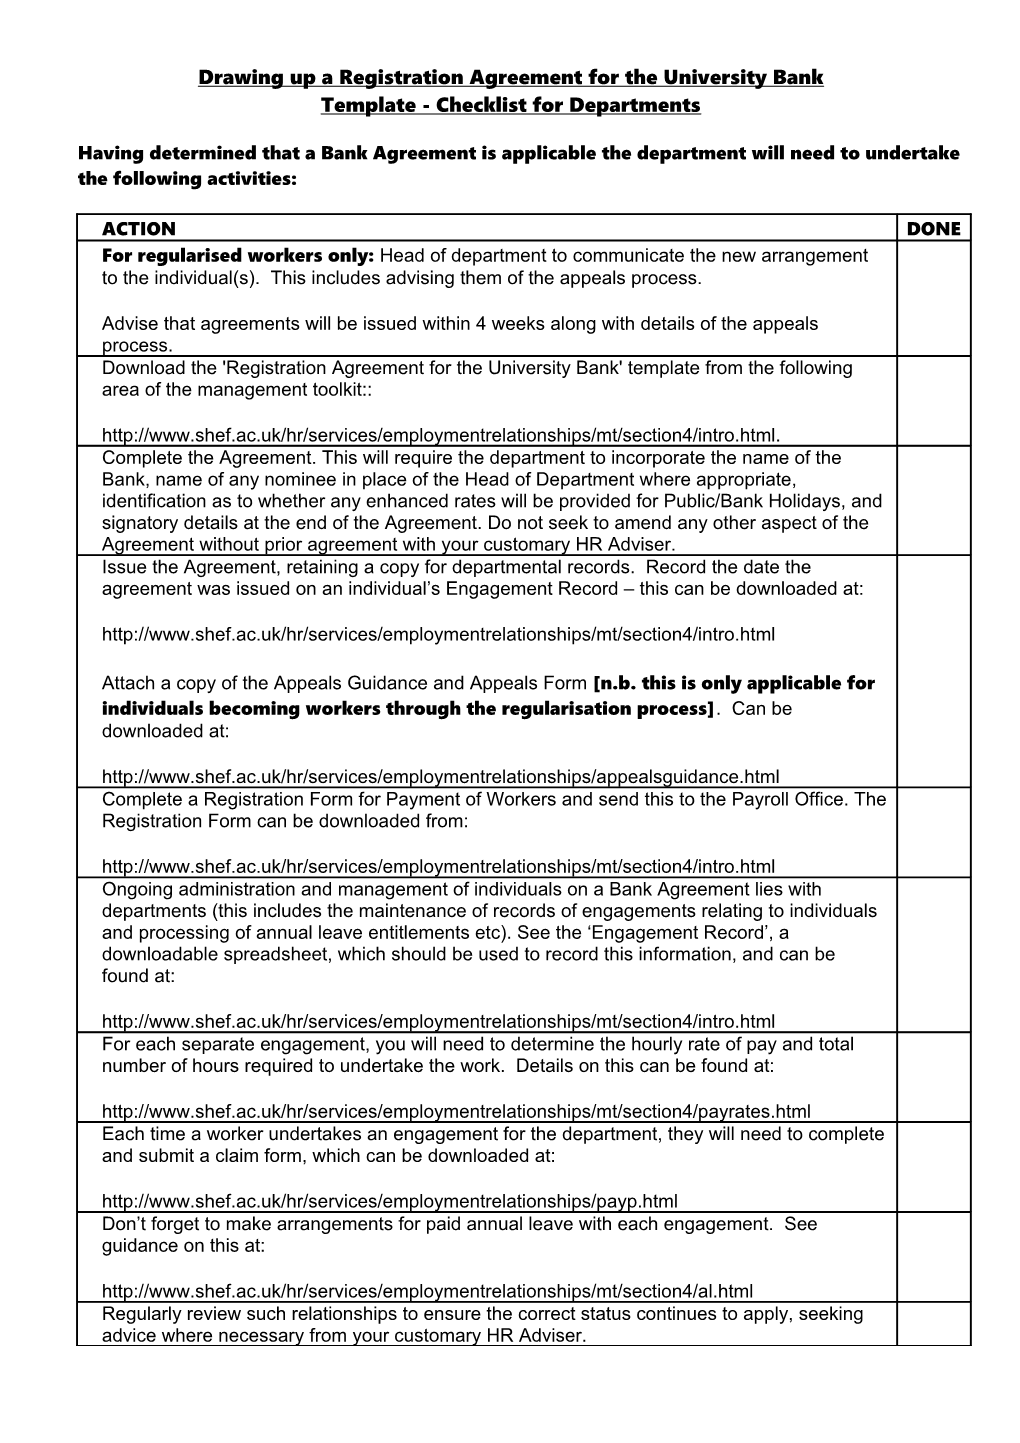 Checklist for Departments Drawing up a Registration Agreement for the University Bank Template